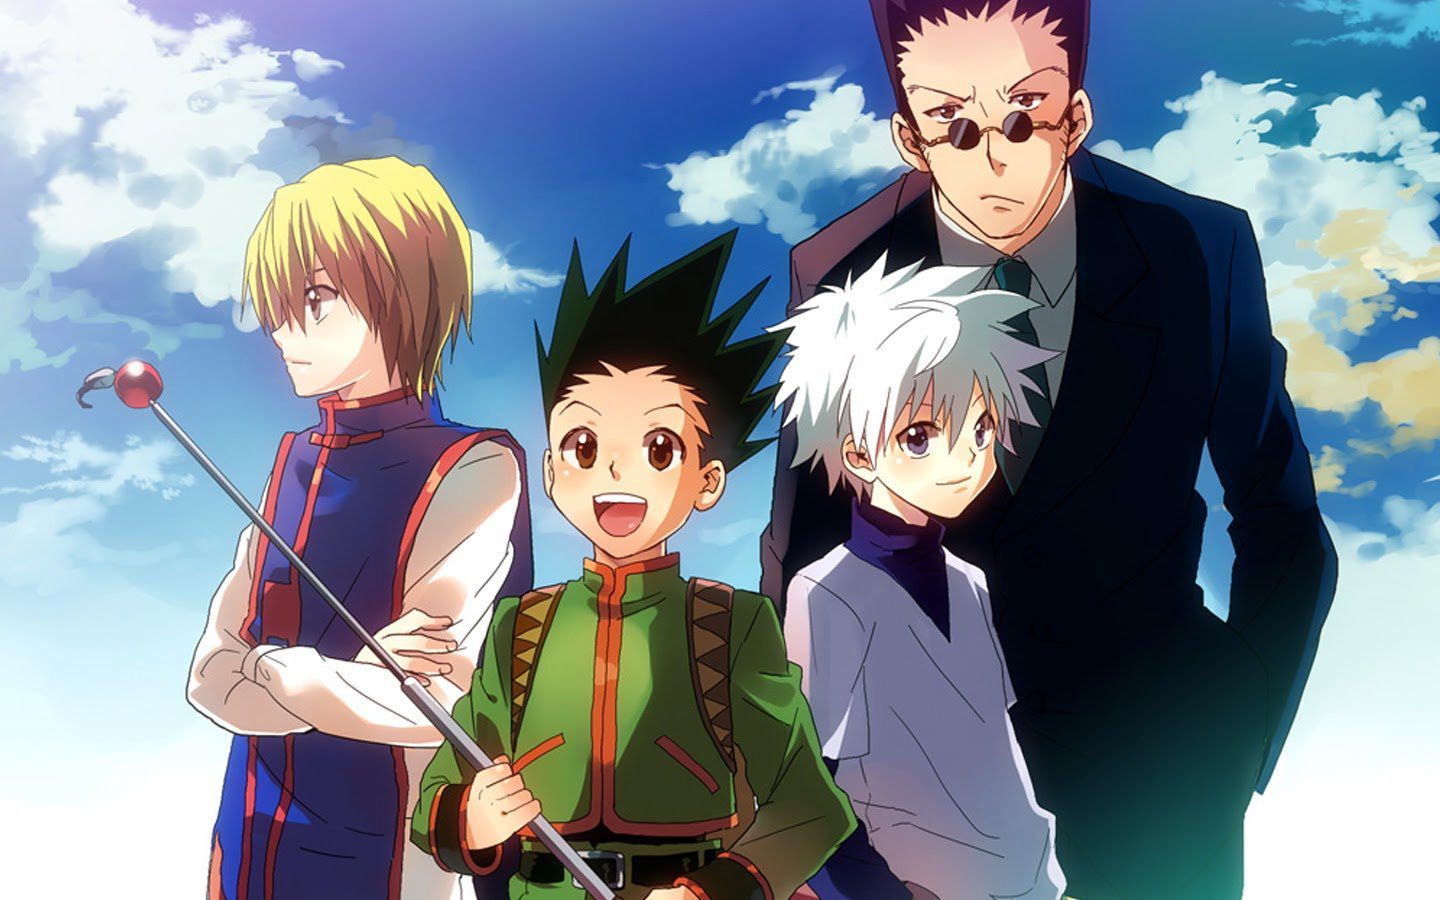 Leorio and the gang